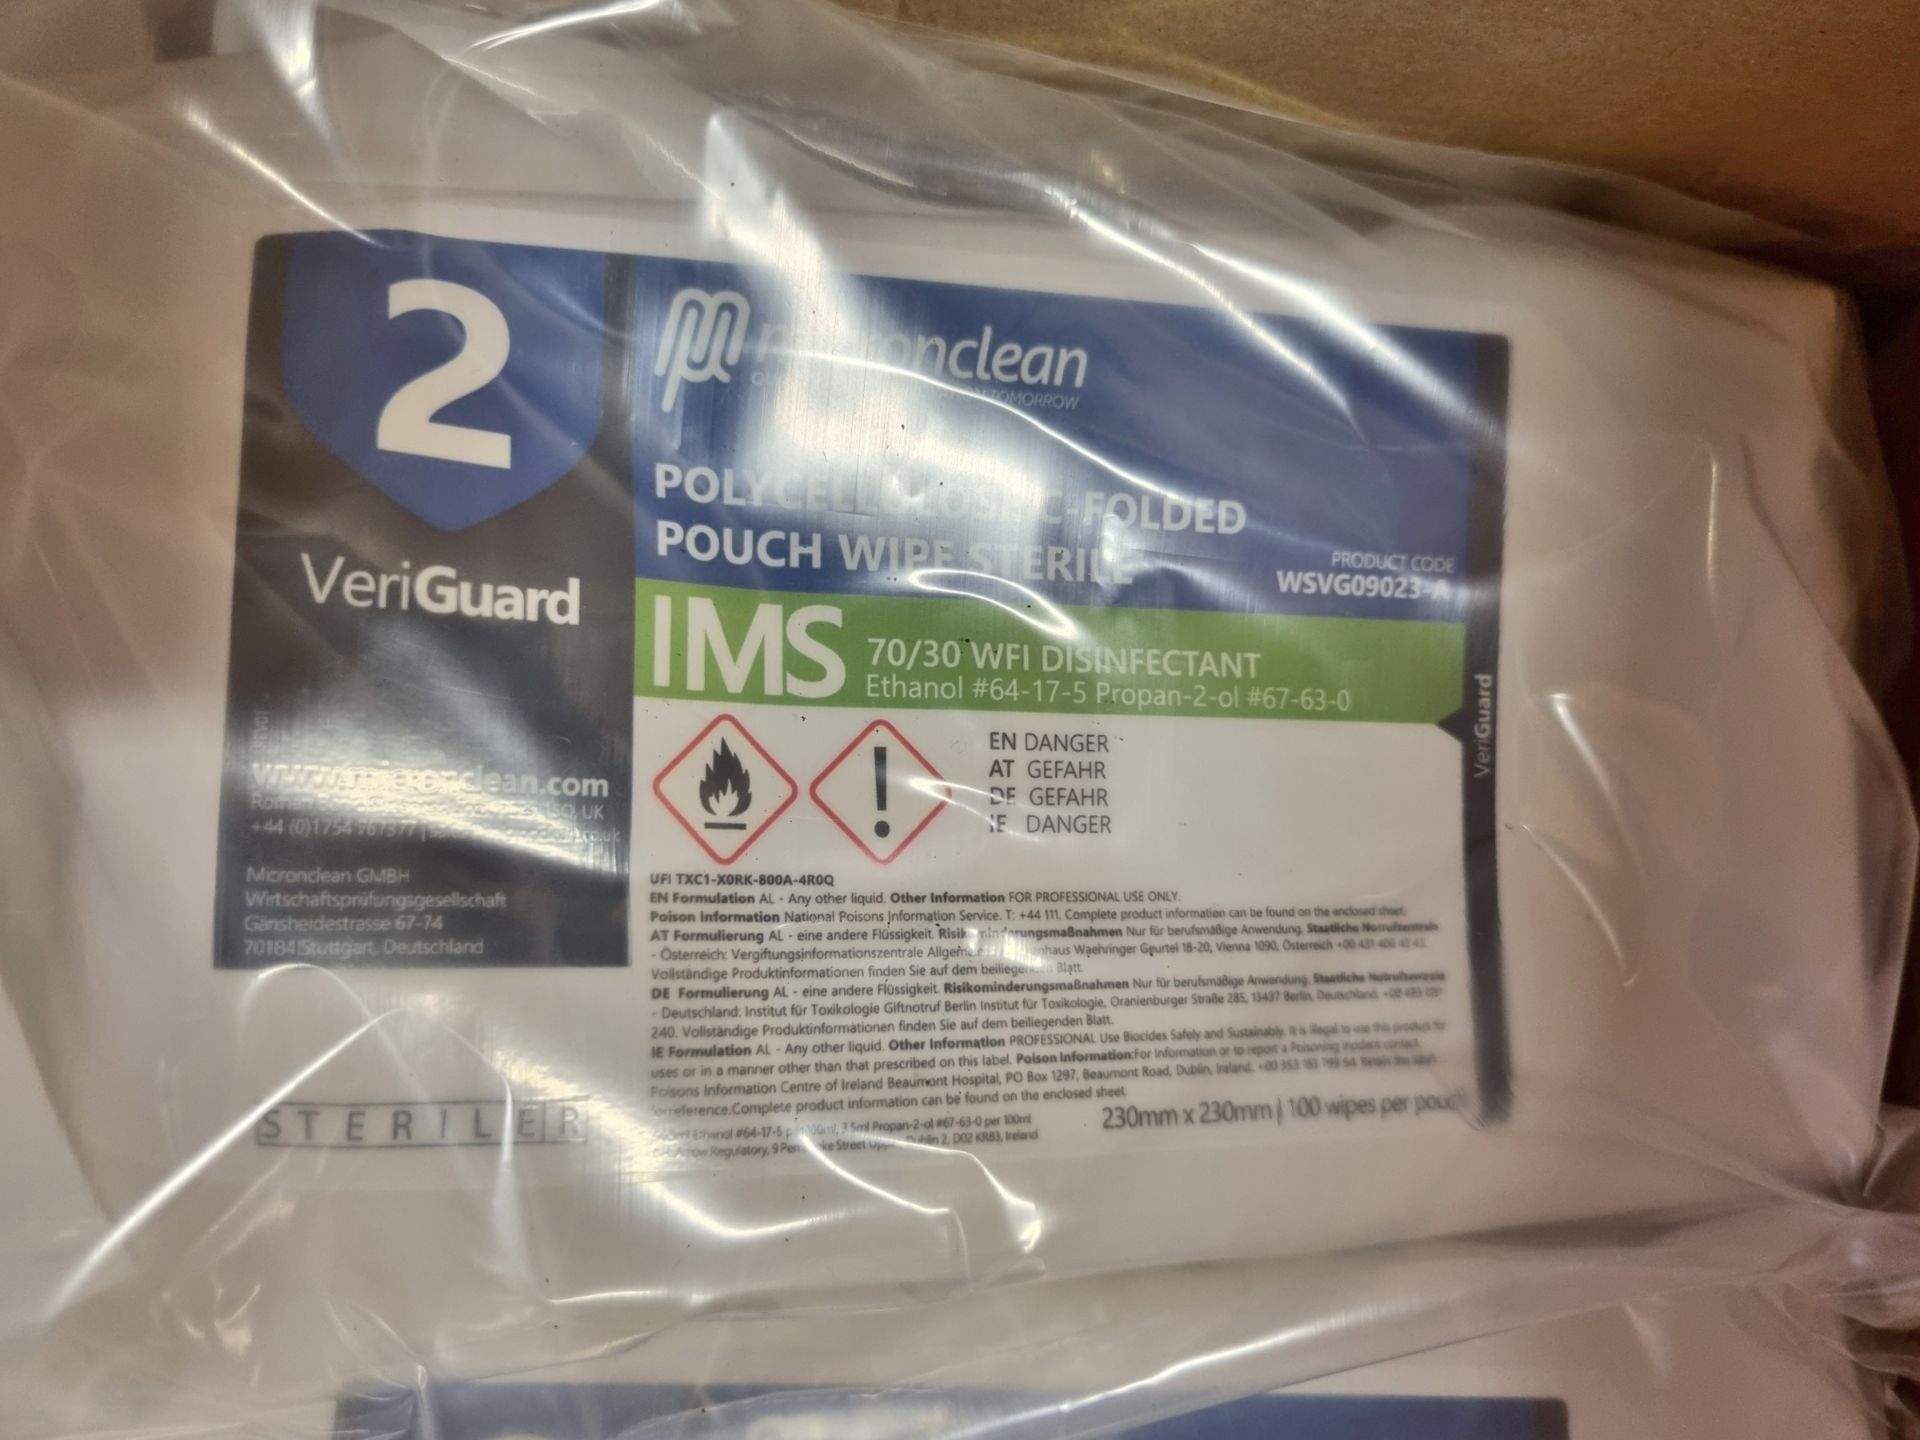 36x boxes of Micronclean Veriguard Polycellulose C-folded pouch wipe sterile - 230mm x 230mm